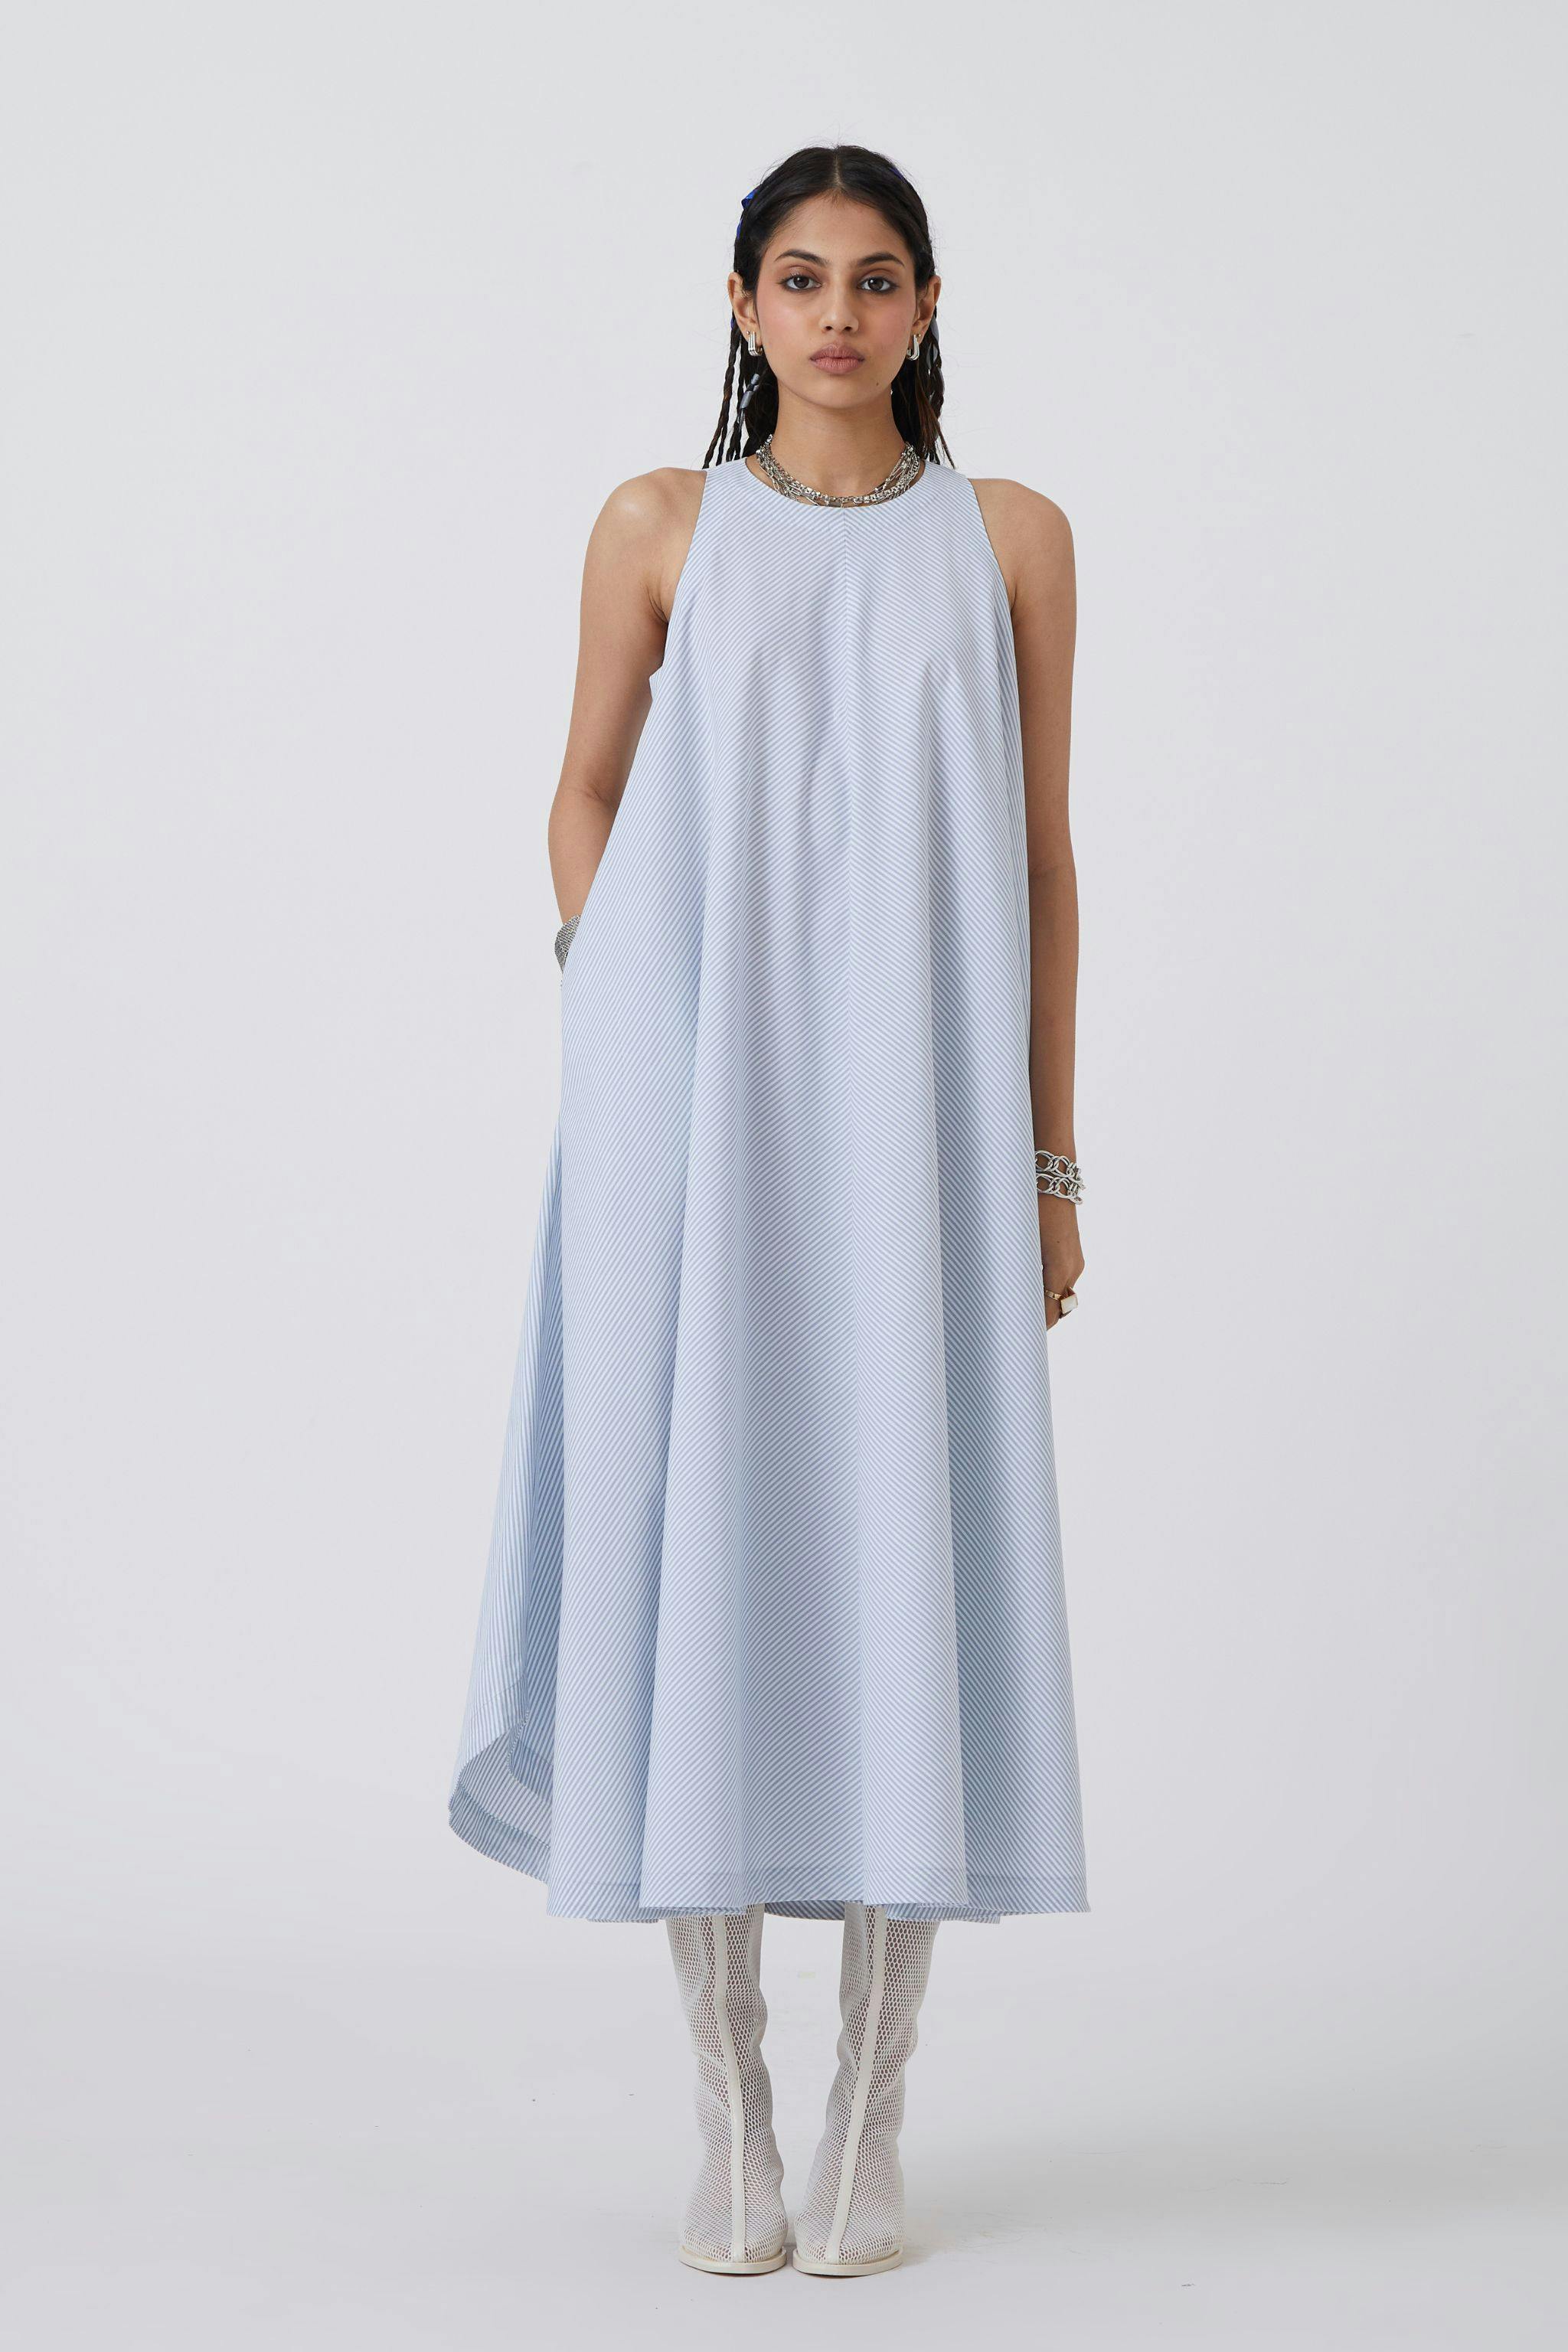 Audric Blue Stripe - Dress, a product by The Summer House